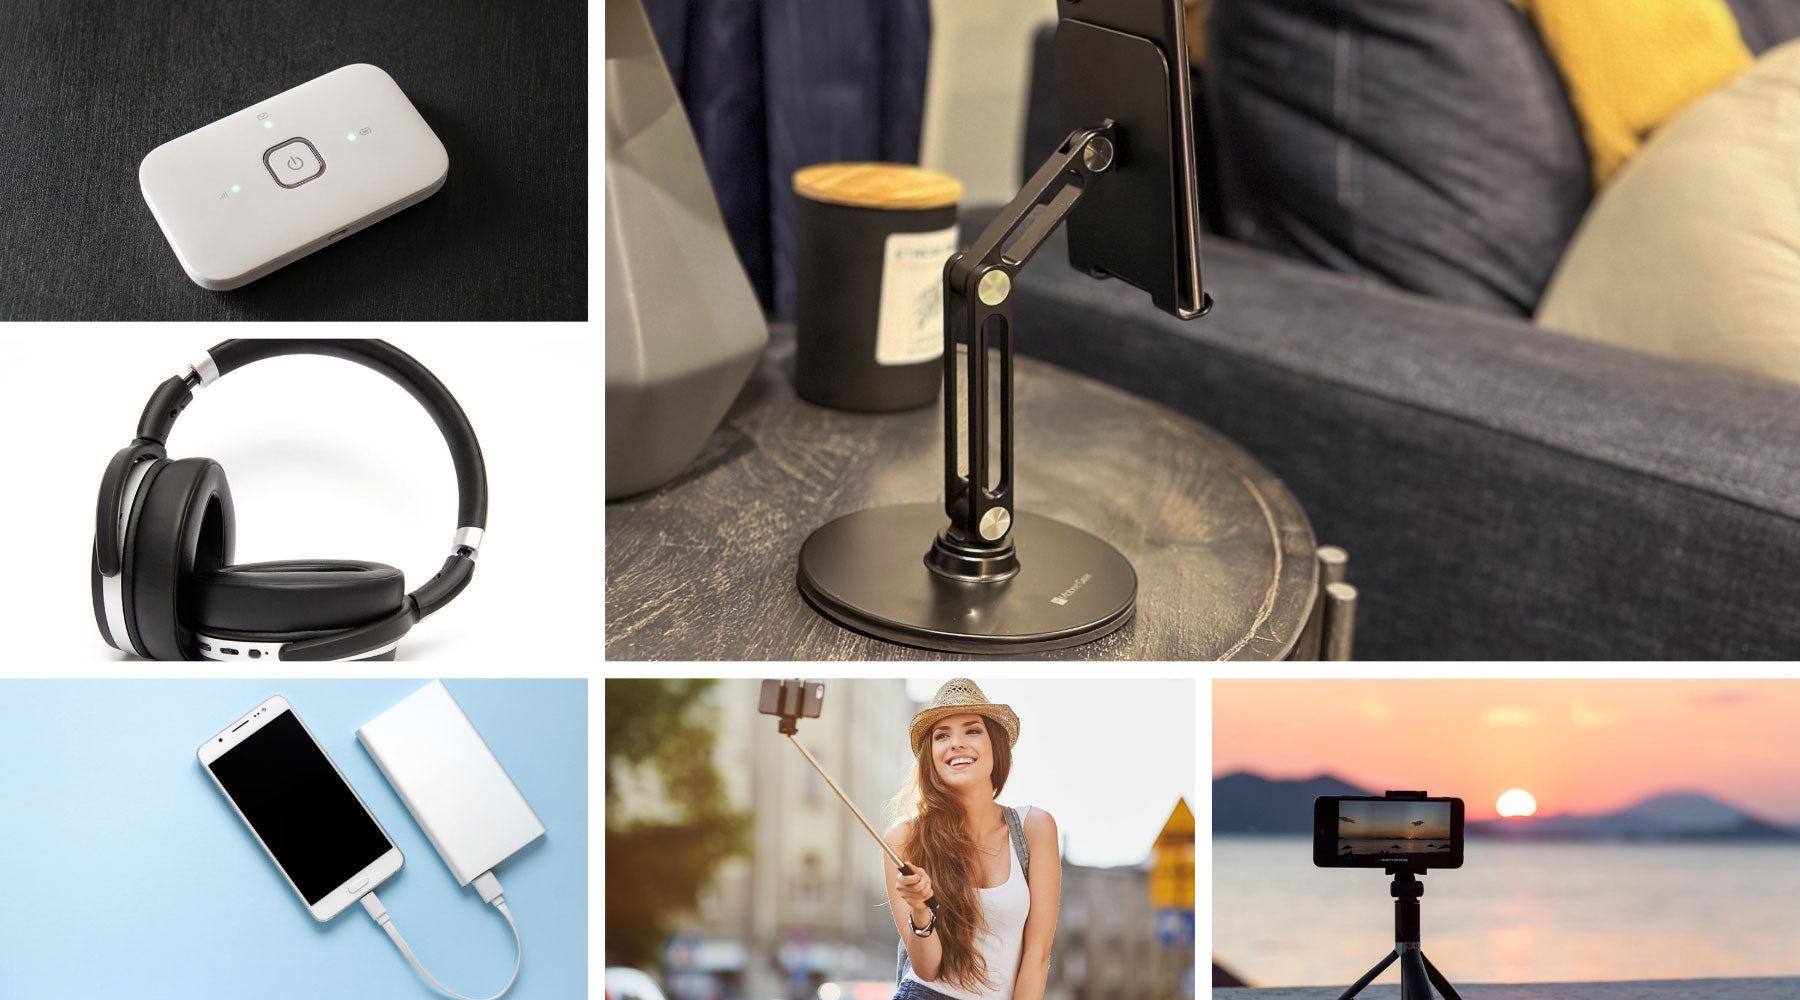 Collage of travel cell phone accessories